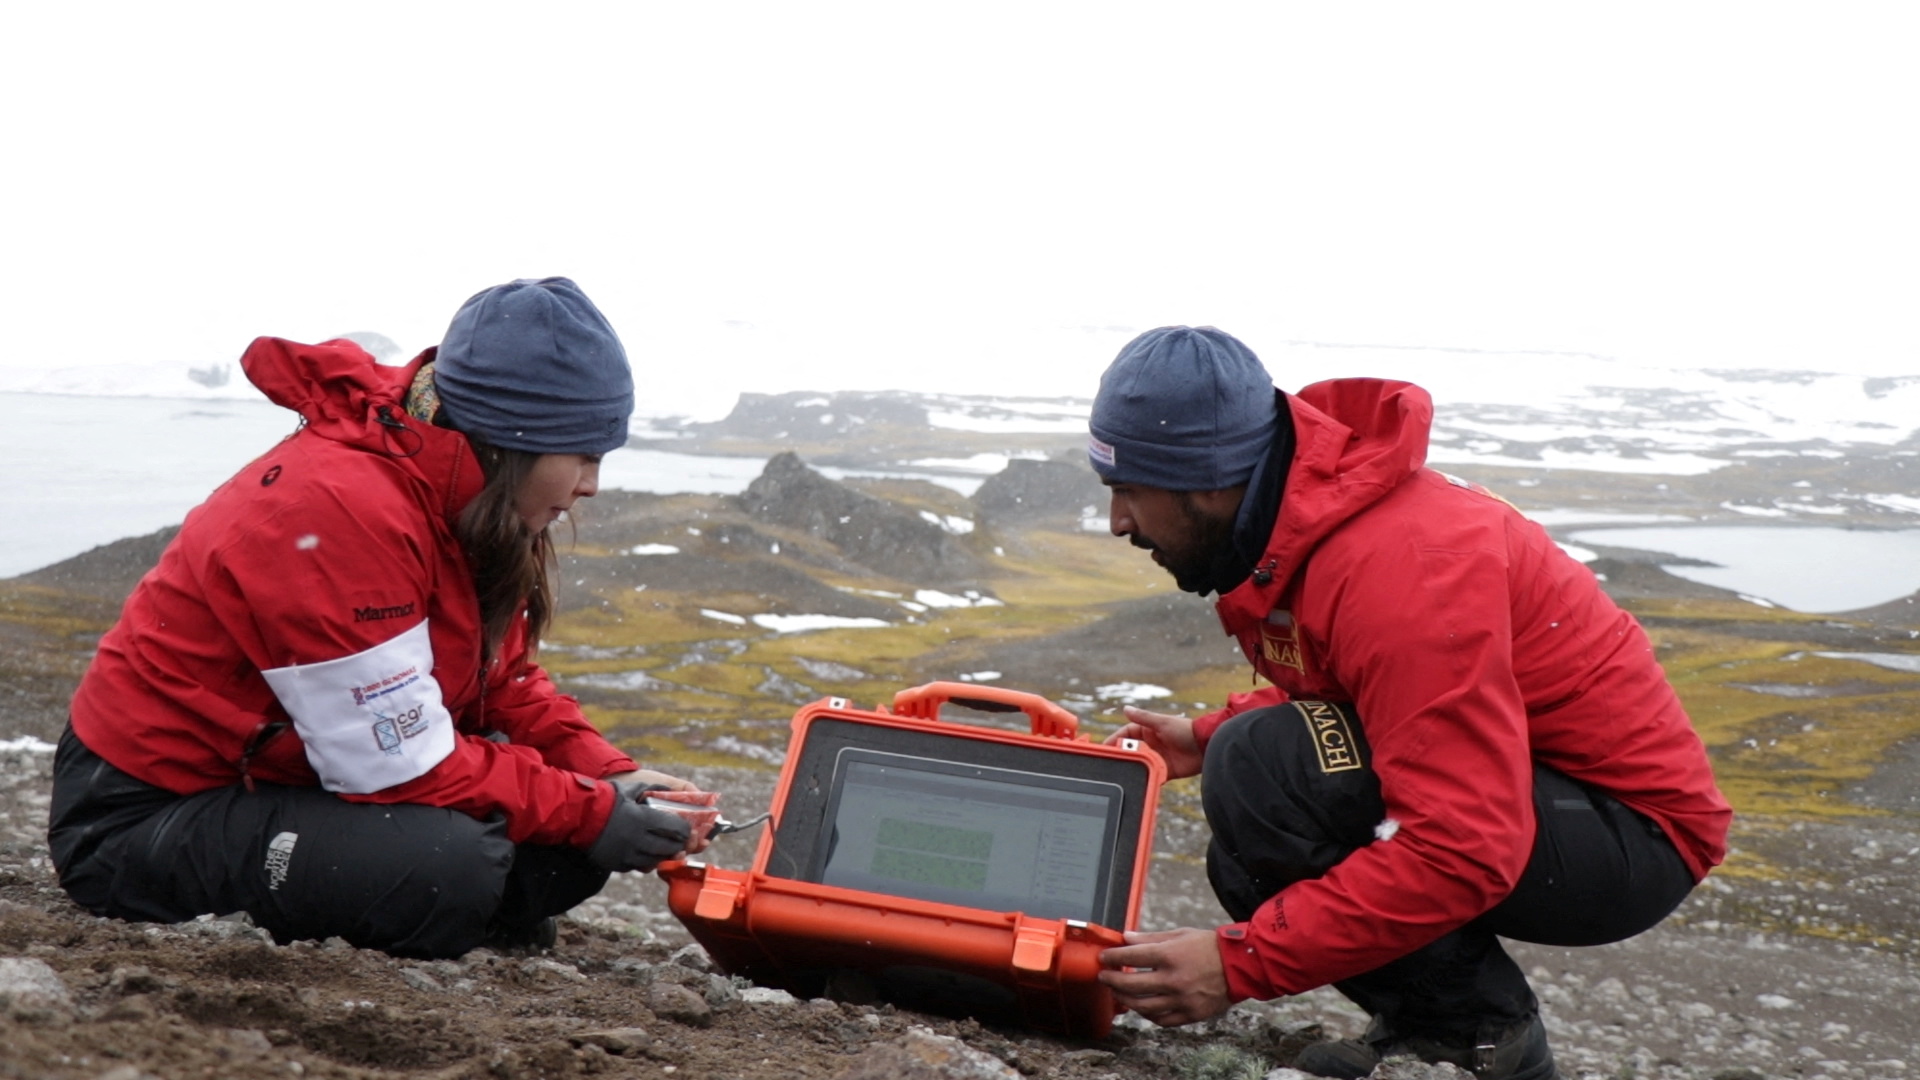 Scientists from the University of Chile work on a laptop as they check organic material looking for a bacteria discovered in Antarctica